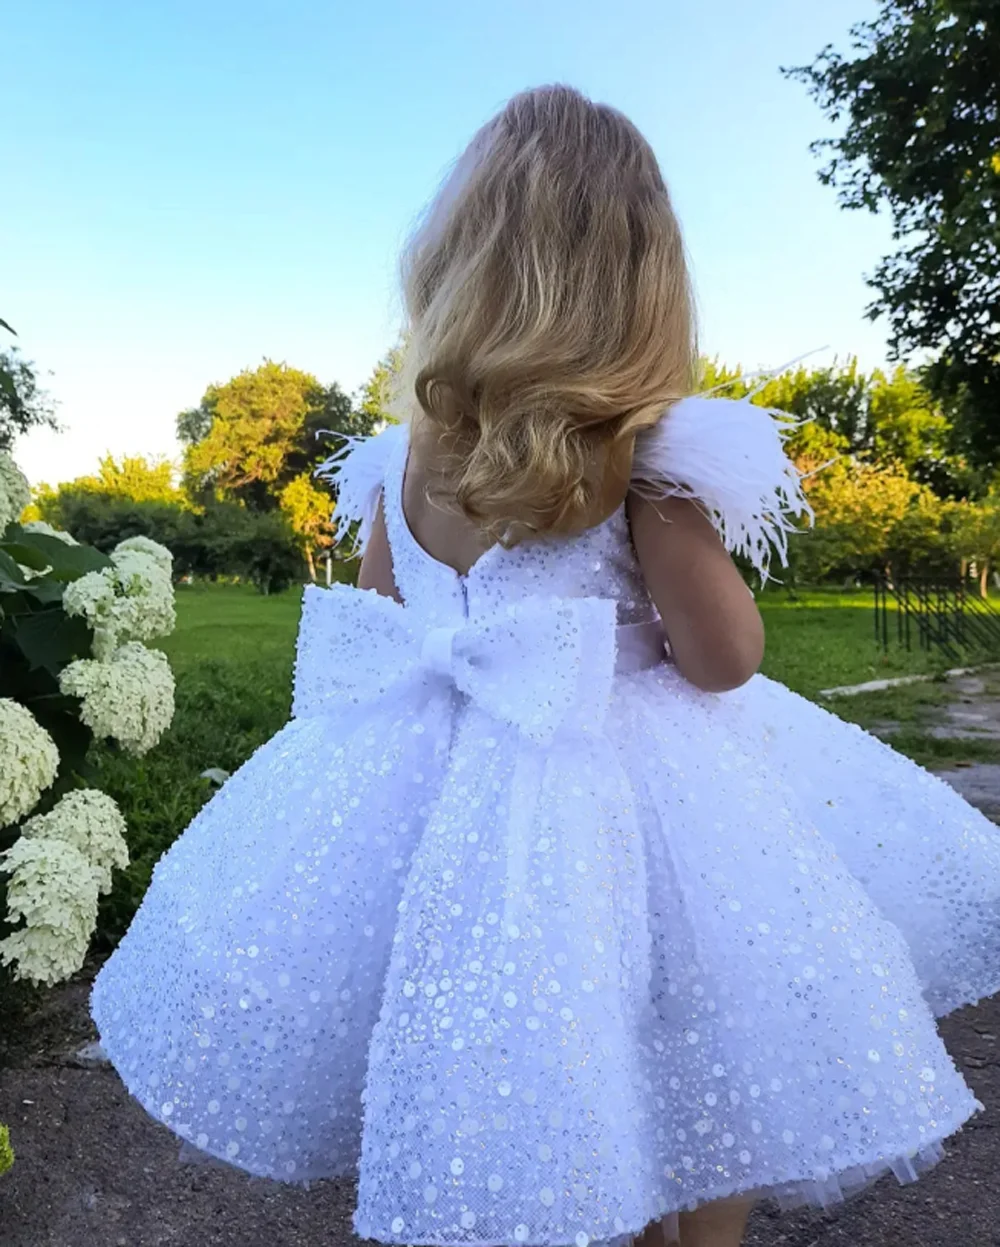 

3-9 Years White Tulle Girl Dress Sequined Bows Children's First Communion Ball Gown Wedding Party Bridesmaid Dress Kids Princess